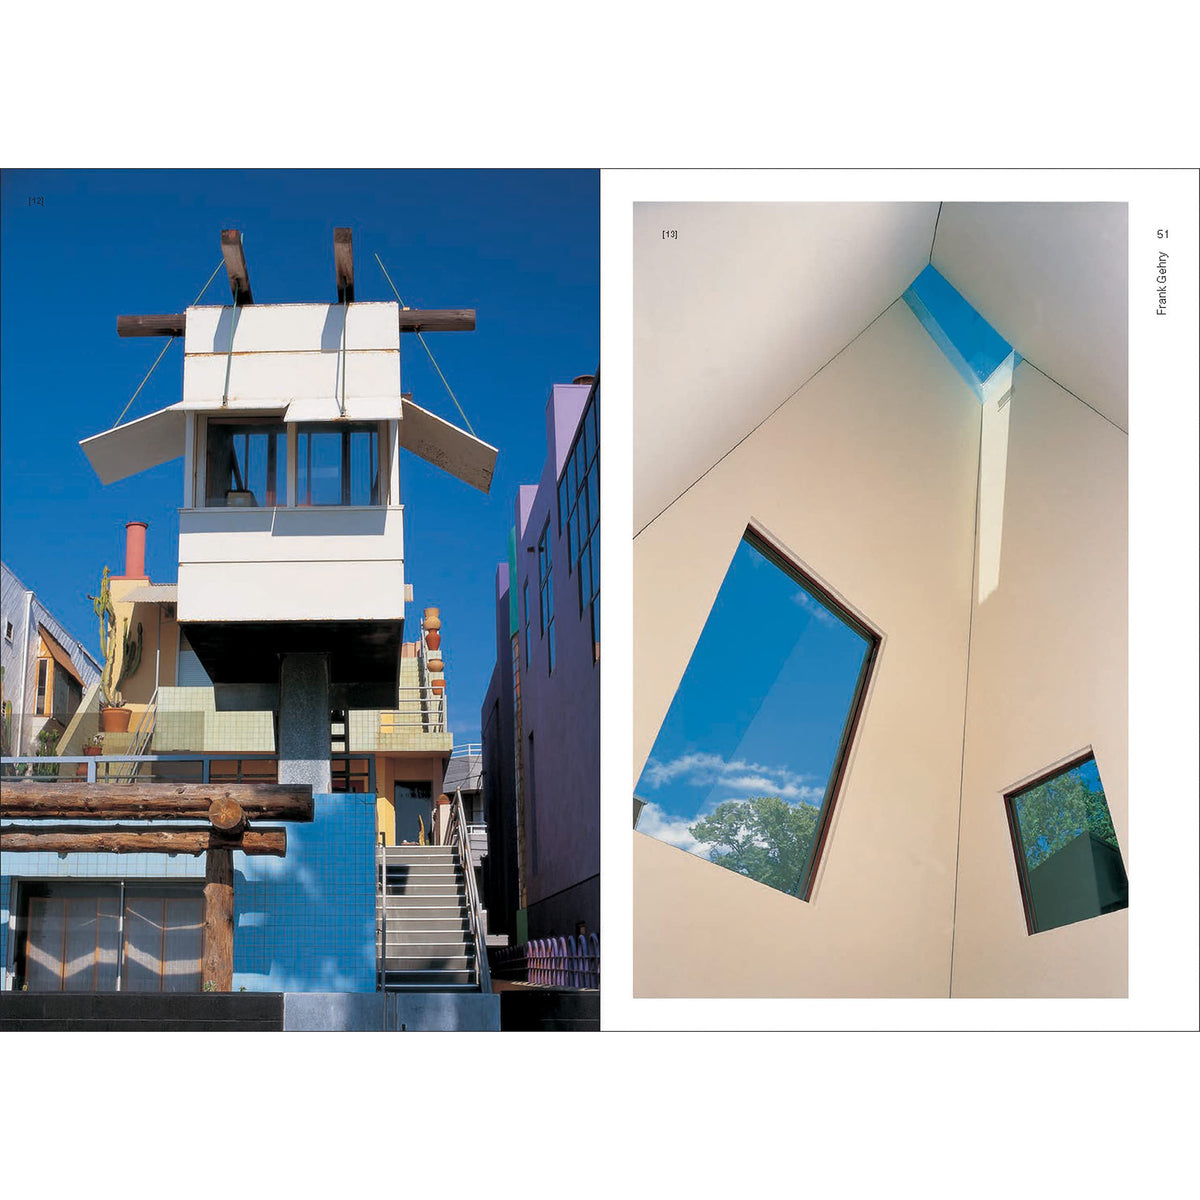 Design Monograph: Gehry